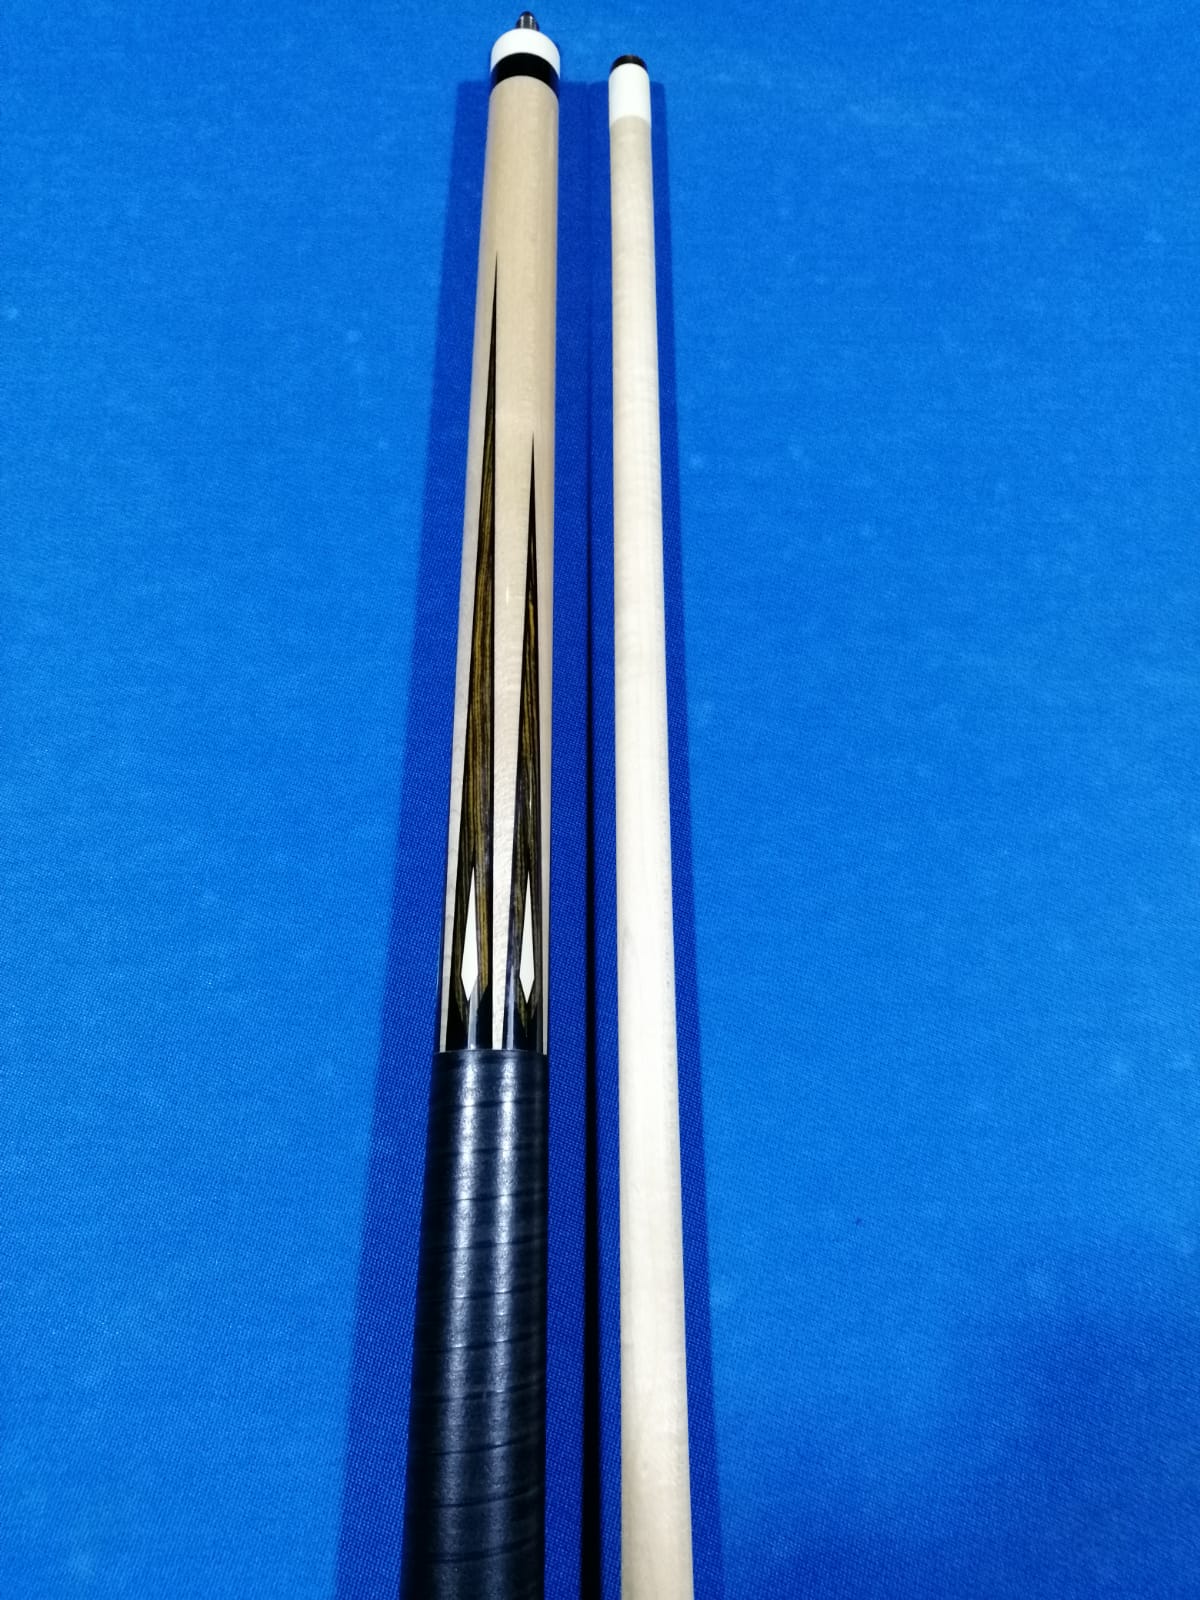 PLAYERS Cues G-3384